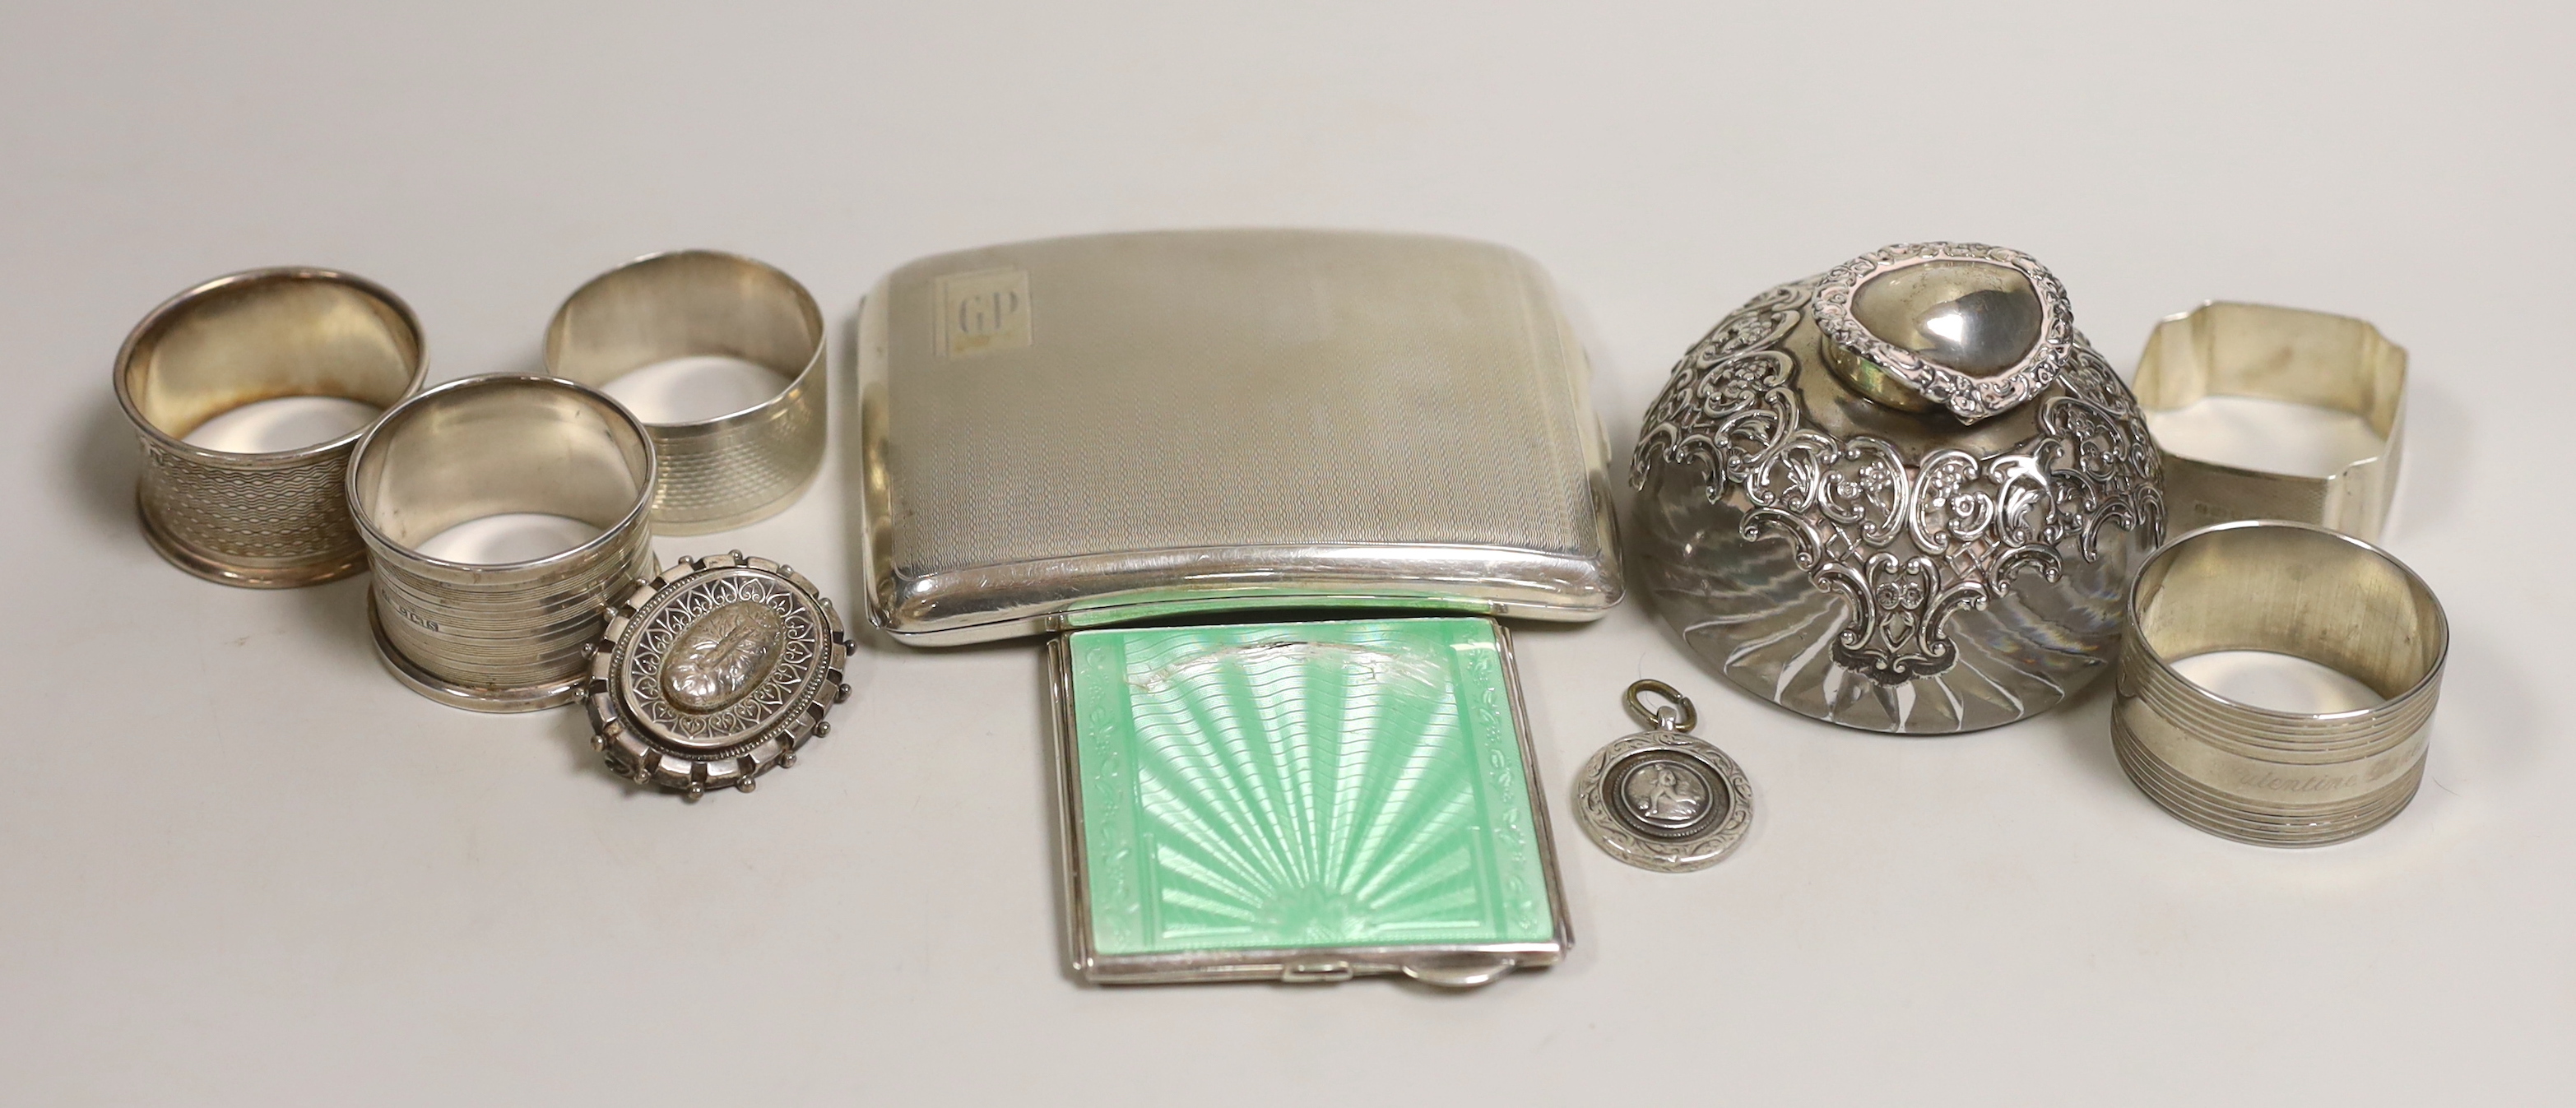 A quantity of mixed silver ware including a cigarette case and enamelled compact (a.f.), a mounted